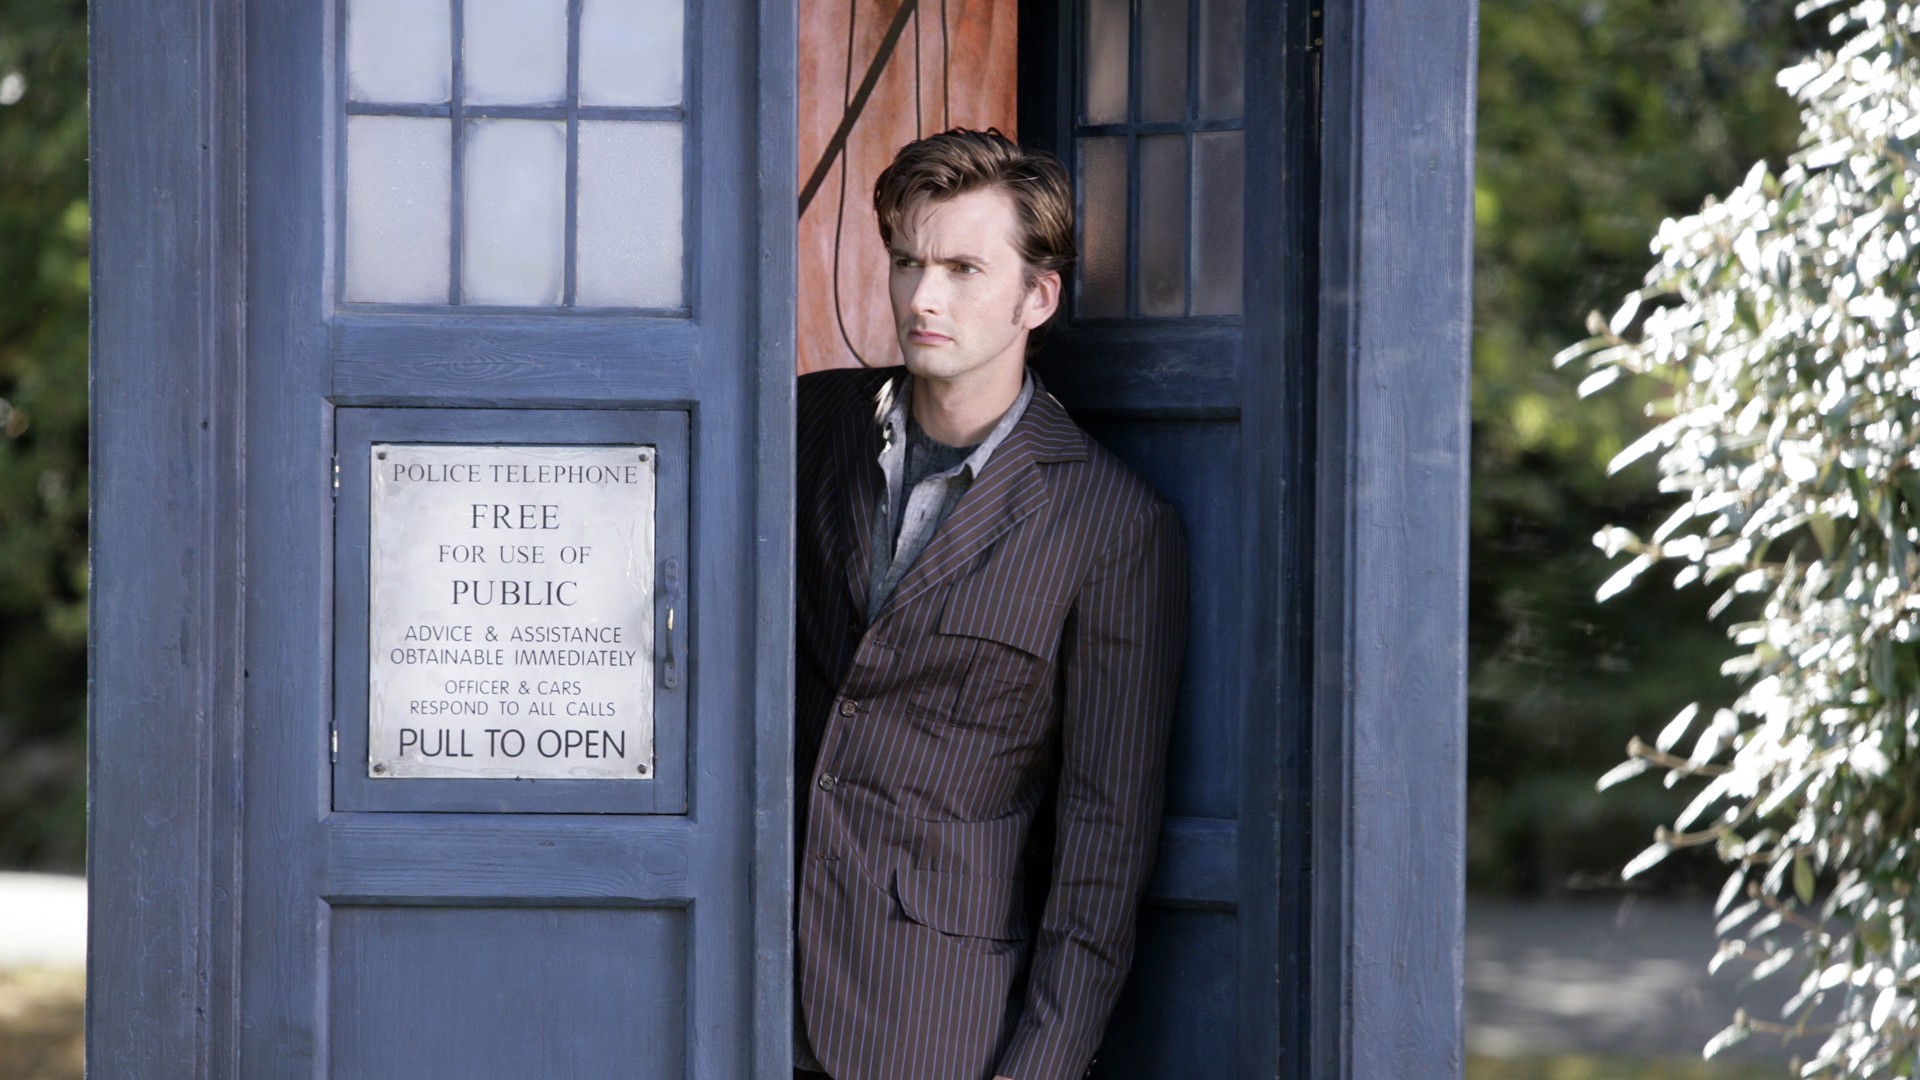 People 1920x1080 Doctor Who The Doctor David Tennant Tenth Doctor TARDIS TV series science fiction Science Fiction Men